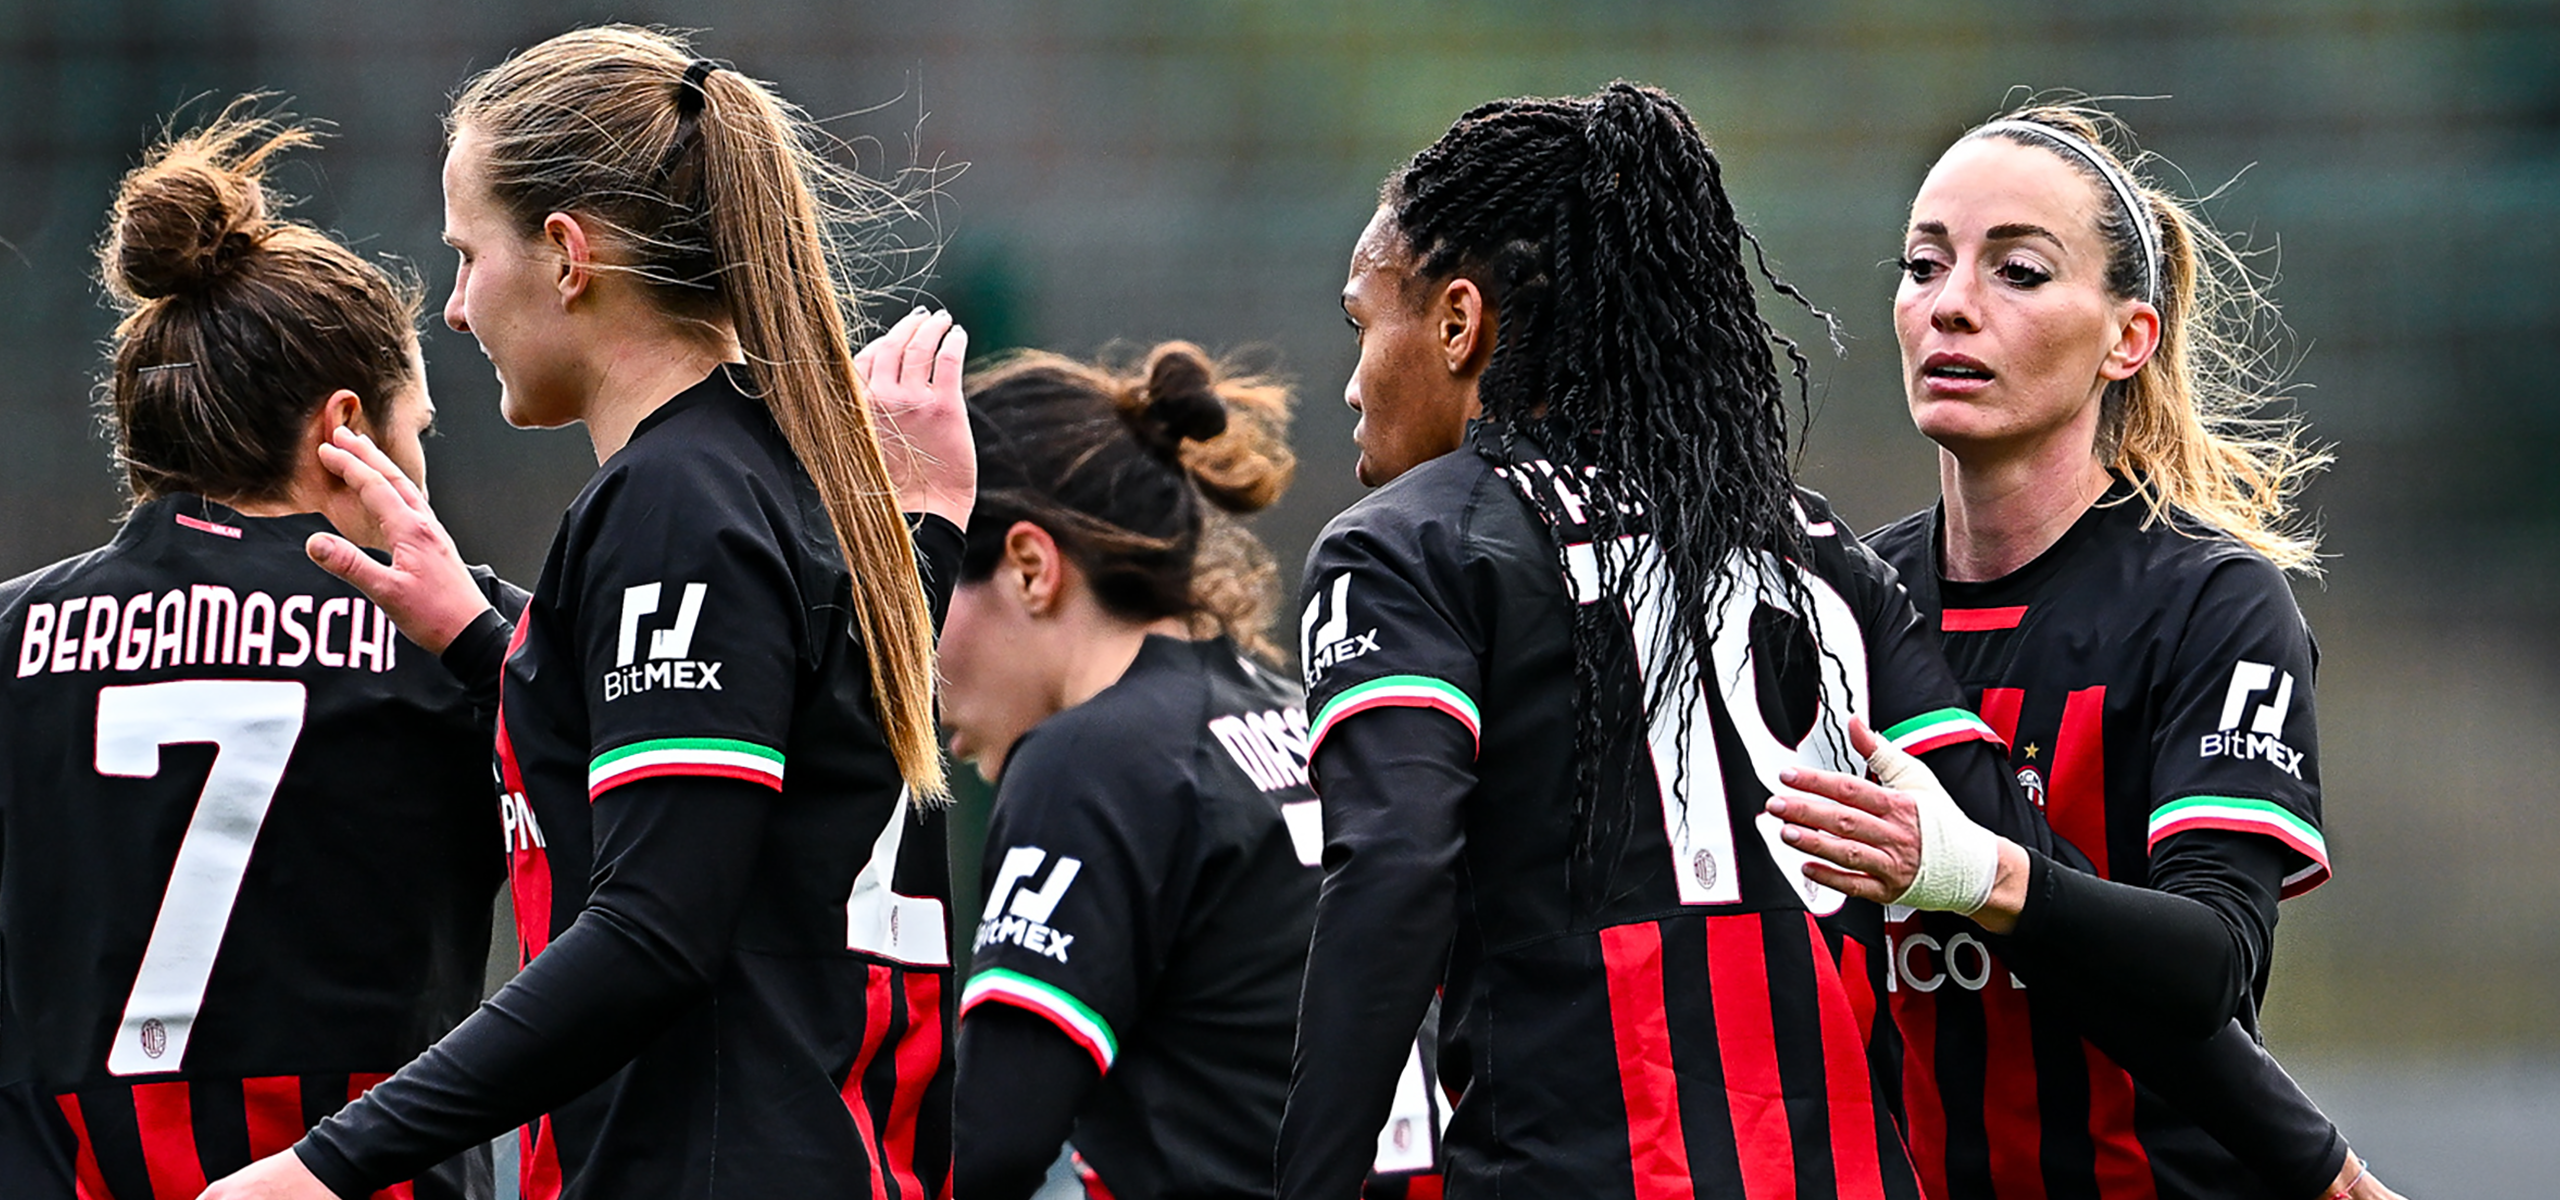 AC Milan v Fiorentina: Tickets now available for the second leg of  quarter-finals of the Coppa Italia Femminile TIM 2022/23